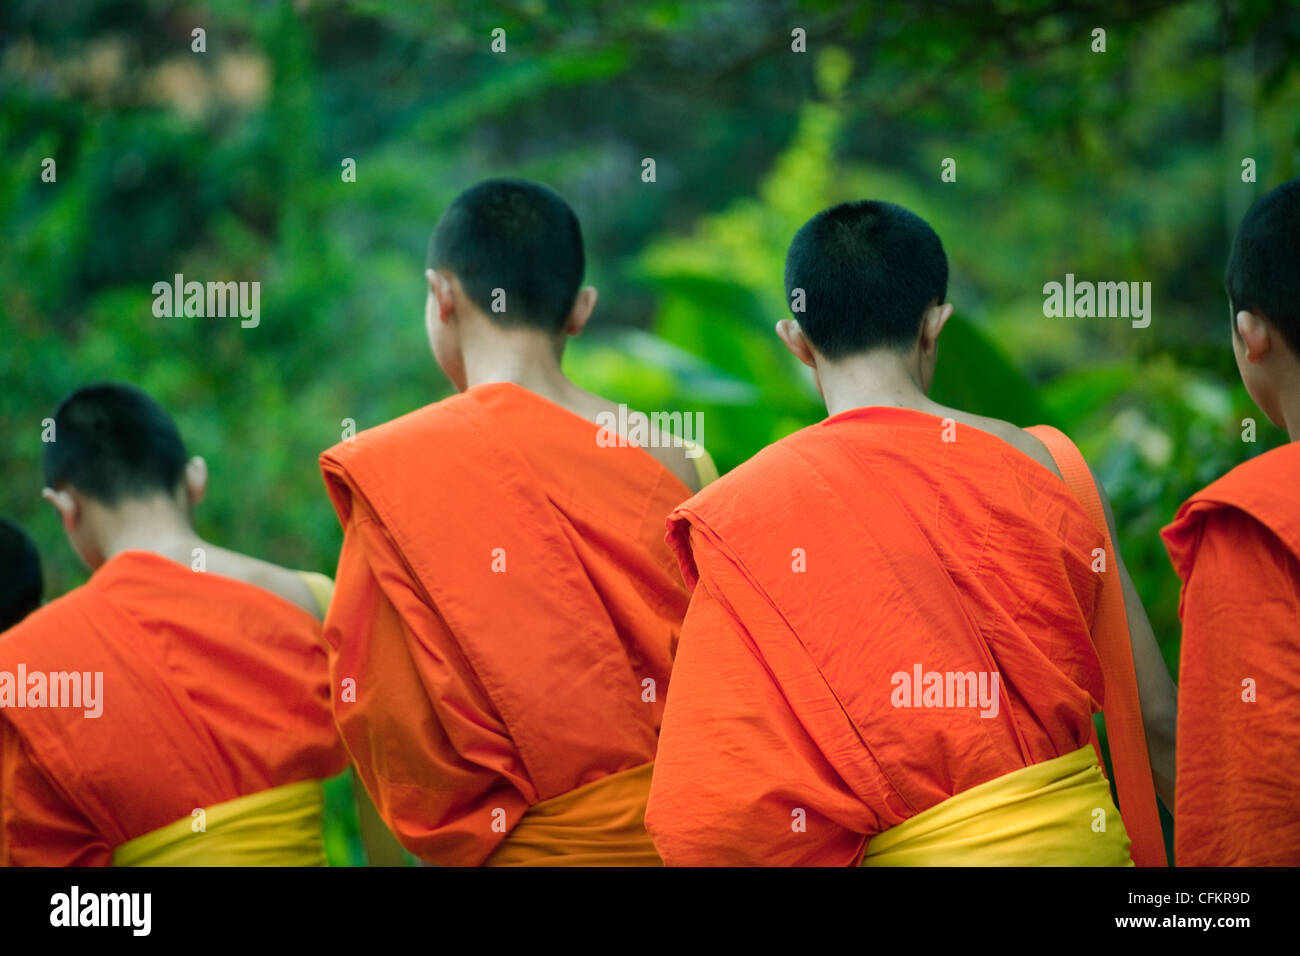 Monks walking in procession during daily morning alms giving ceremony in Luang Prabang, Laos Stock Photo